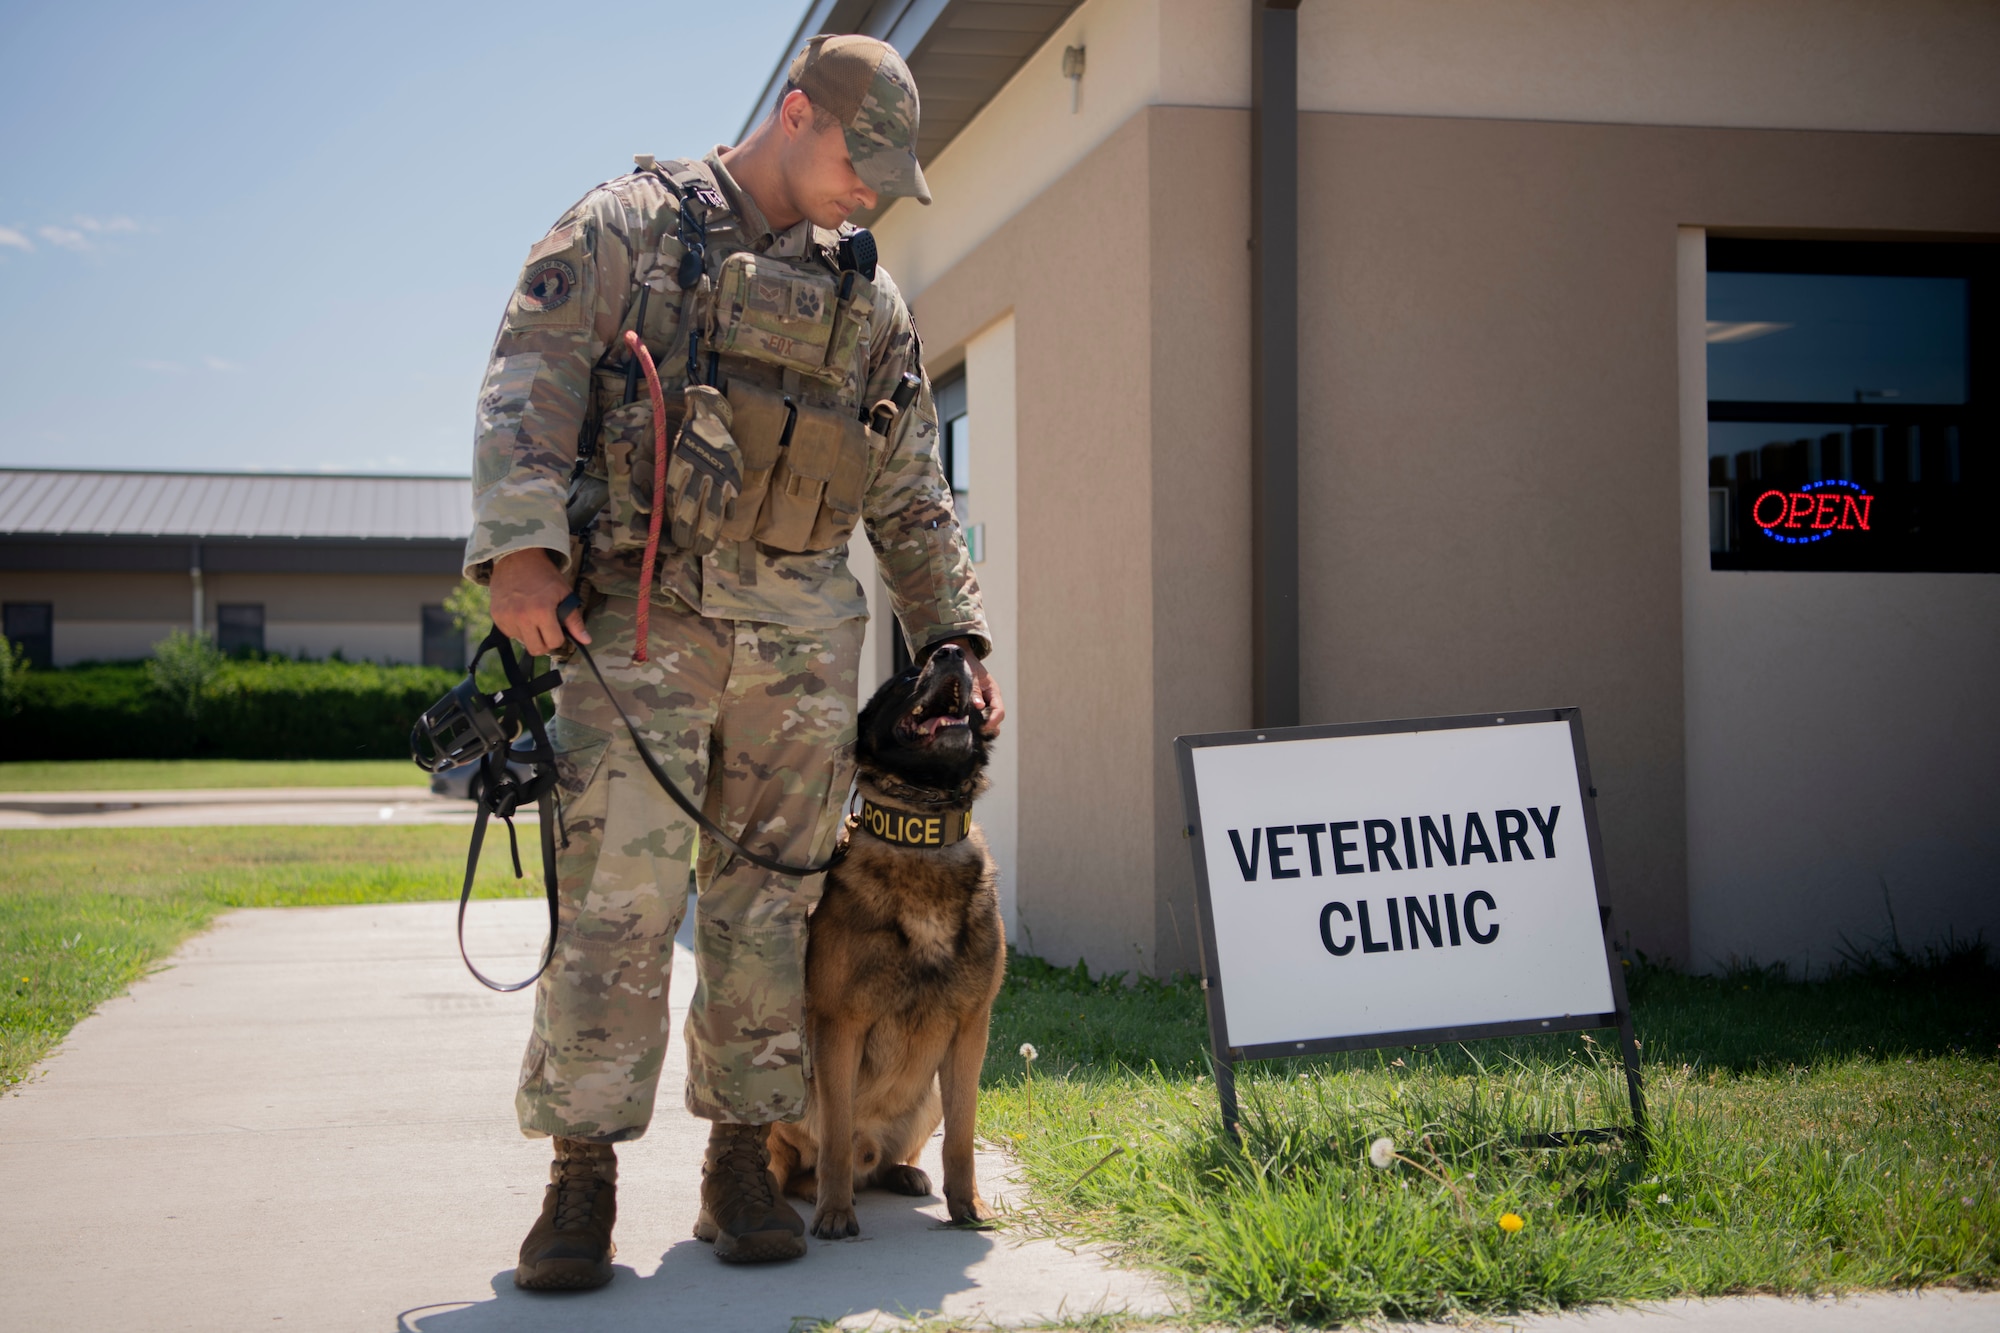 Senior Airman Joseph Fox, 22nd Security Forces Squadron military working dog handler, and military working dog Sani stand outside the veterinary clinic at McConnell Air Force Base, Kansas May 30, 2023. A team of ophthalmologists from Kansas State University's Veterinary Health Center visited McConnell, where they provided free eye exams for military working dogs.